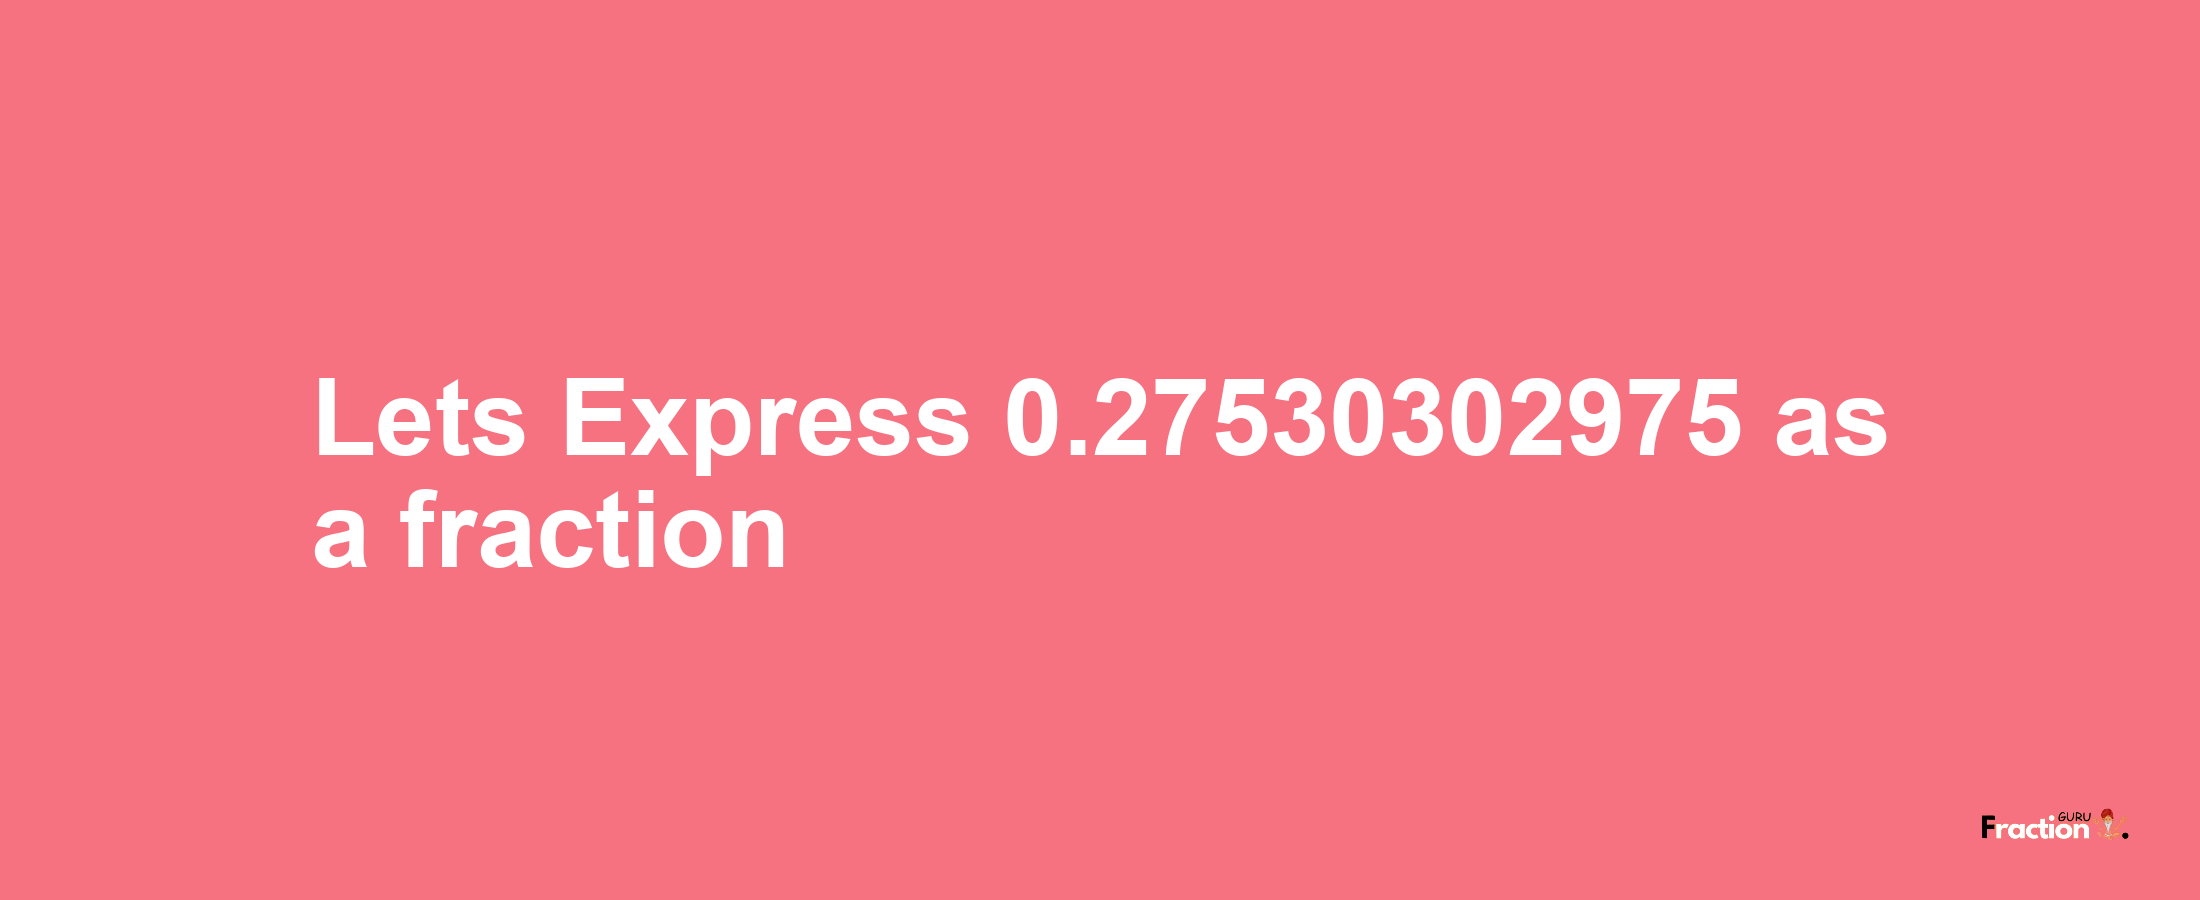 Lets Express 0.27530302975 as afraction